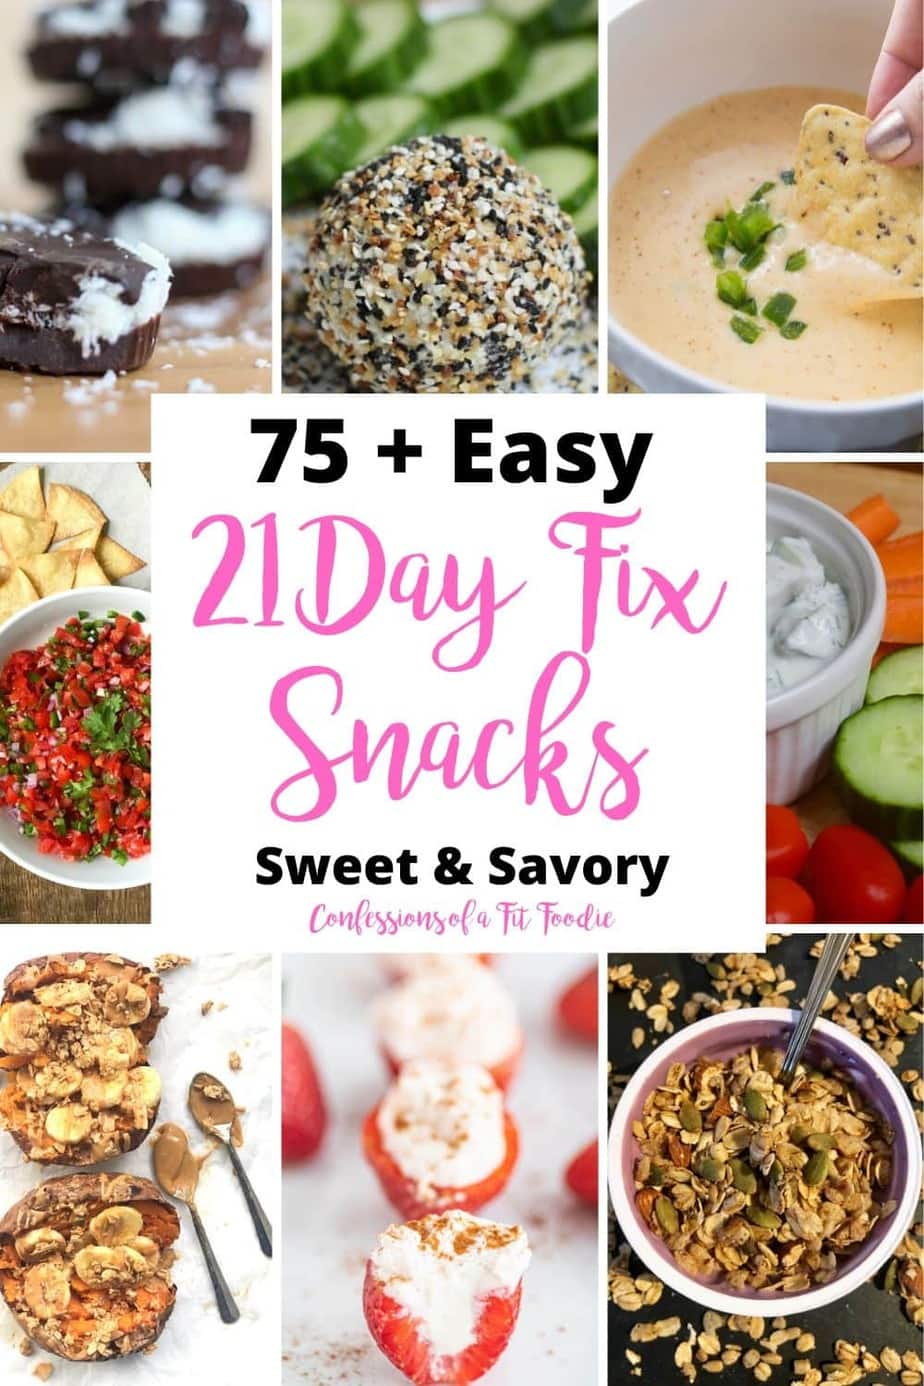 3 Healthy Snack Mixes to Try + Tips on Portion Control - Ambitious